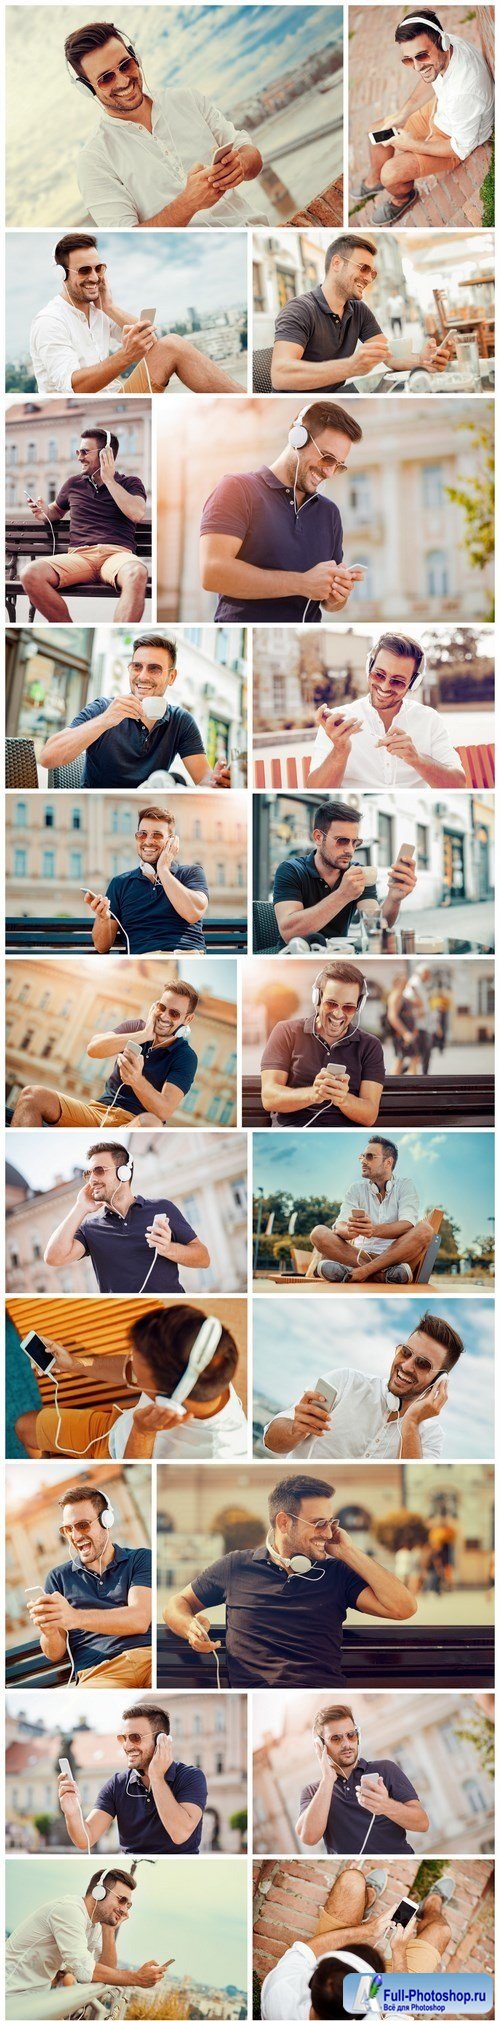 Smiling handsome guy listening to music 2 - 24xUHQ JPEG Photo Stock